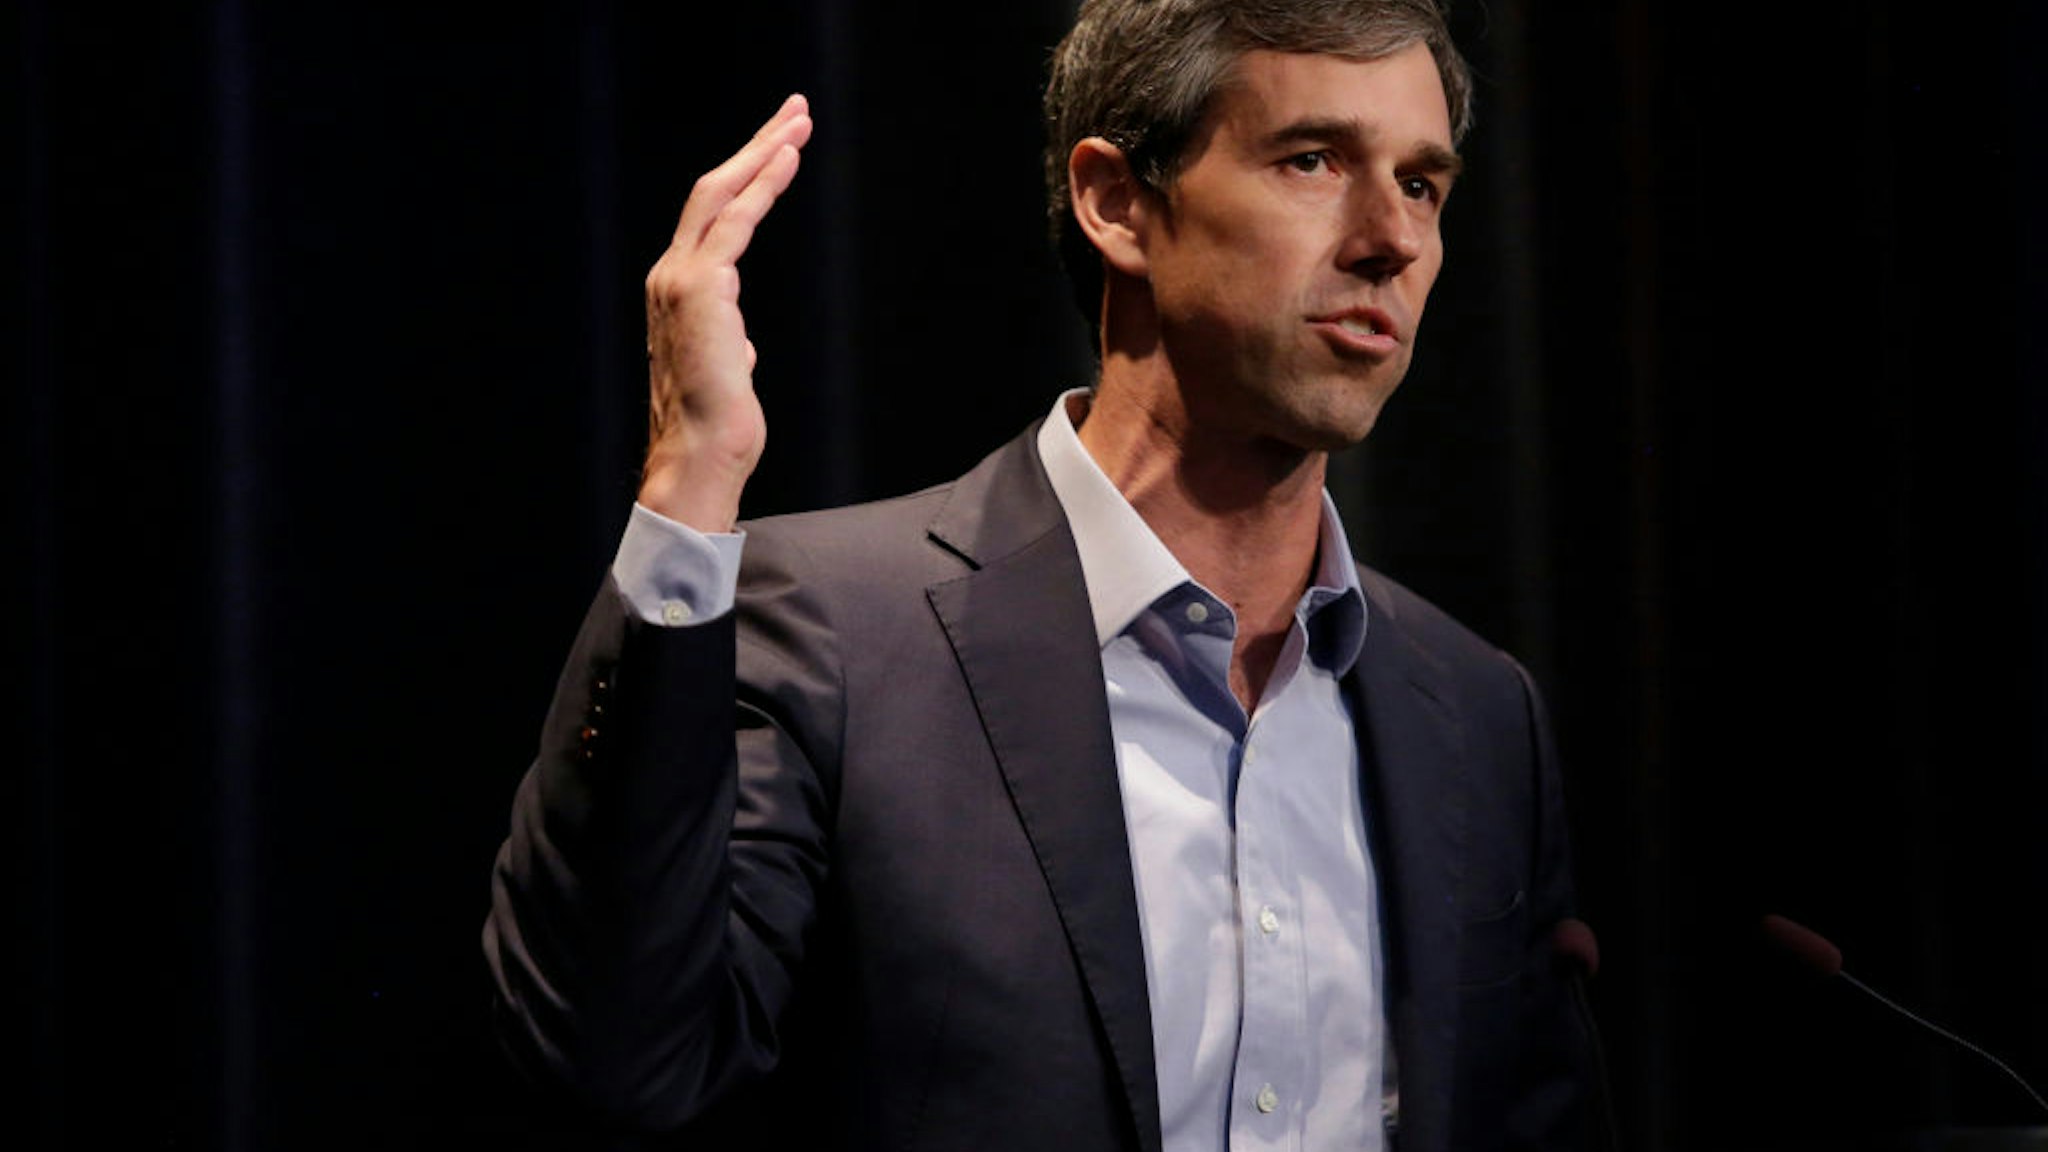 ALTOONA, IA - AUGUST 21: Democratic presidential candidate and former Rep. for Texas Beto O'Rourke speaks at the Iowa Federation Labor Convention on August 21, 2019 in Altoona, Iowa. Candidates had 10 minutes each to address union members during the convention. The 2020 Democratic presidential Iowa caucuses will take place on Monday, February 3, 2020.(